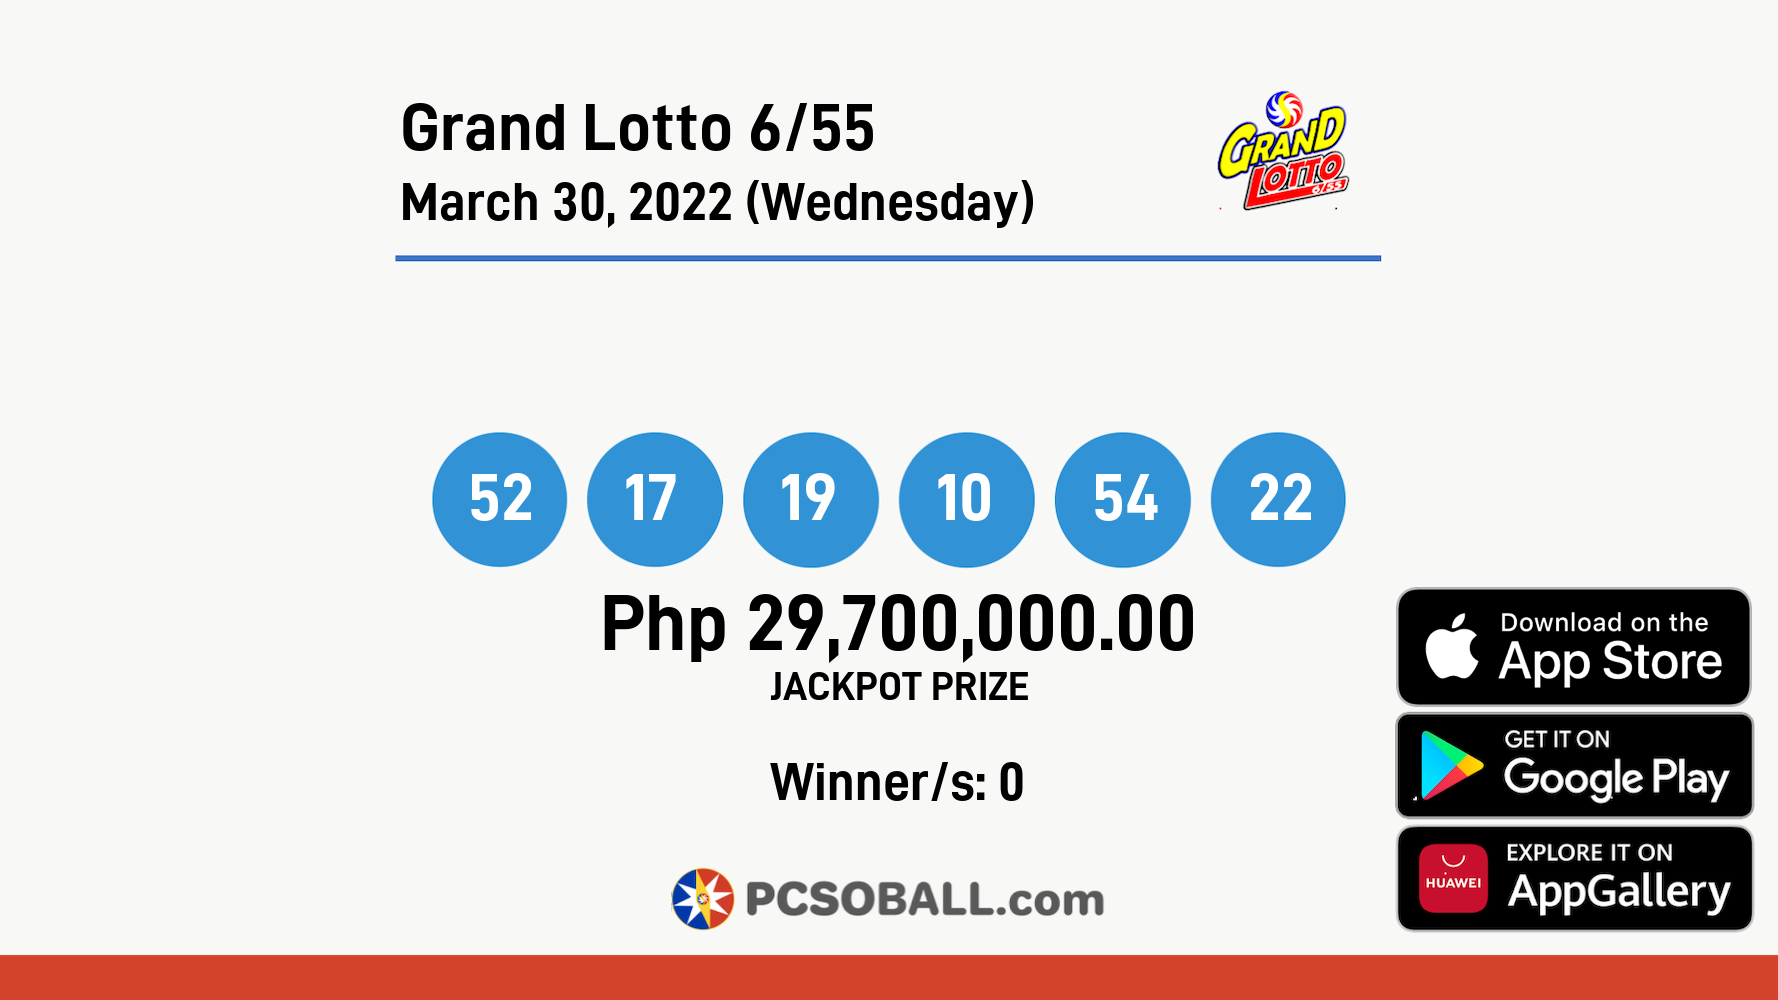 Grand Lotto 6/55 March 30, 2022 (Wednesday) Result